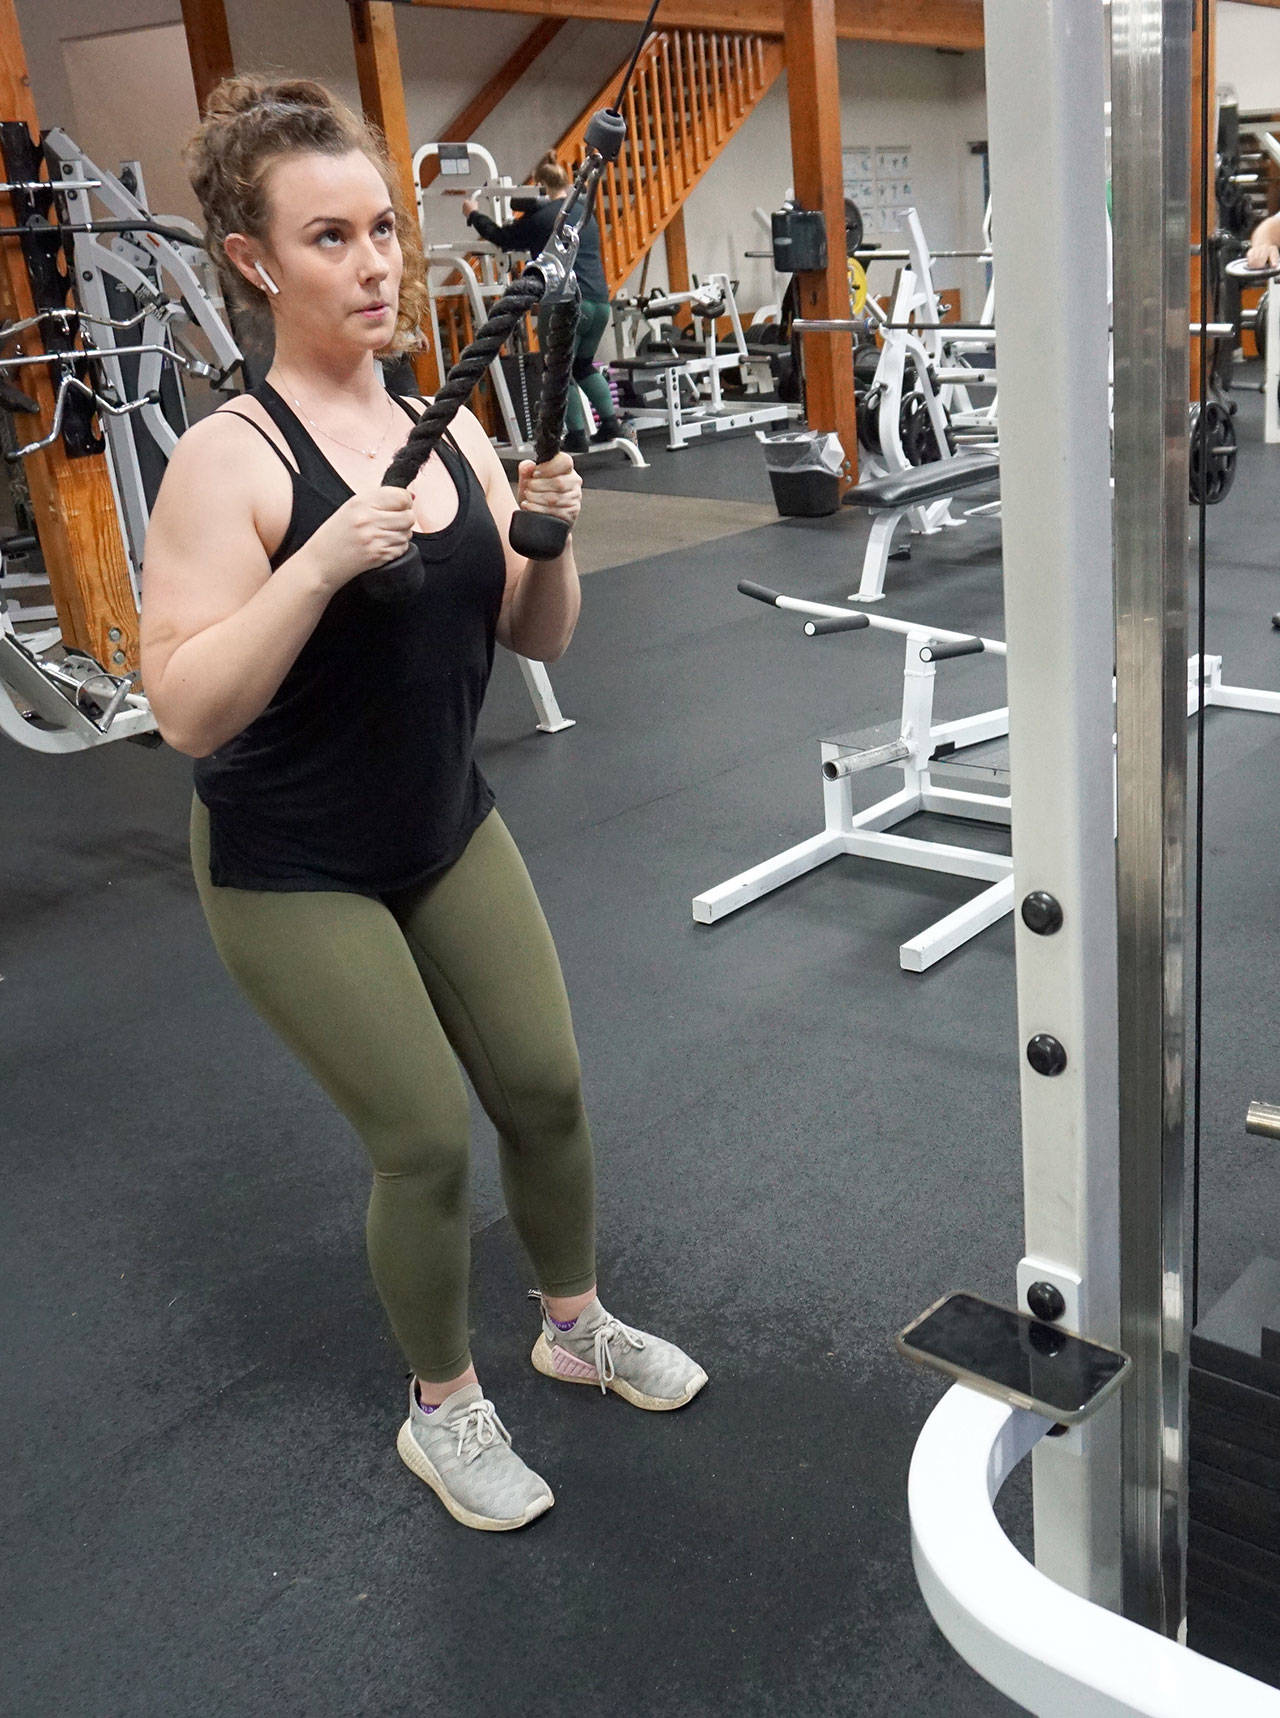 Katie Royster of Port Orchard works her upper body in the Westcoast Fitness center.